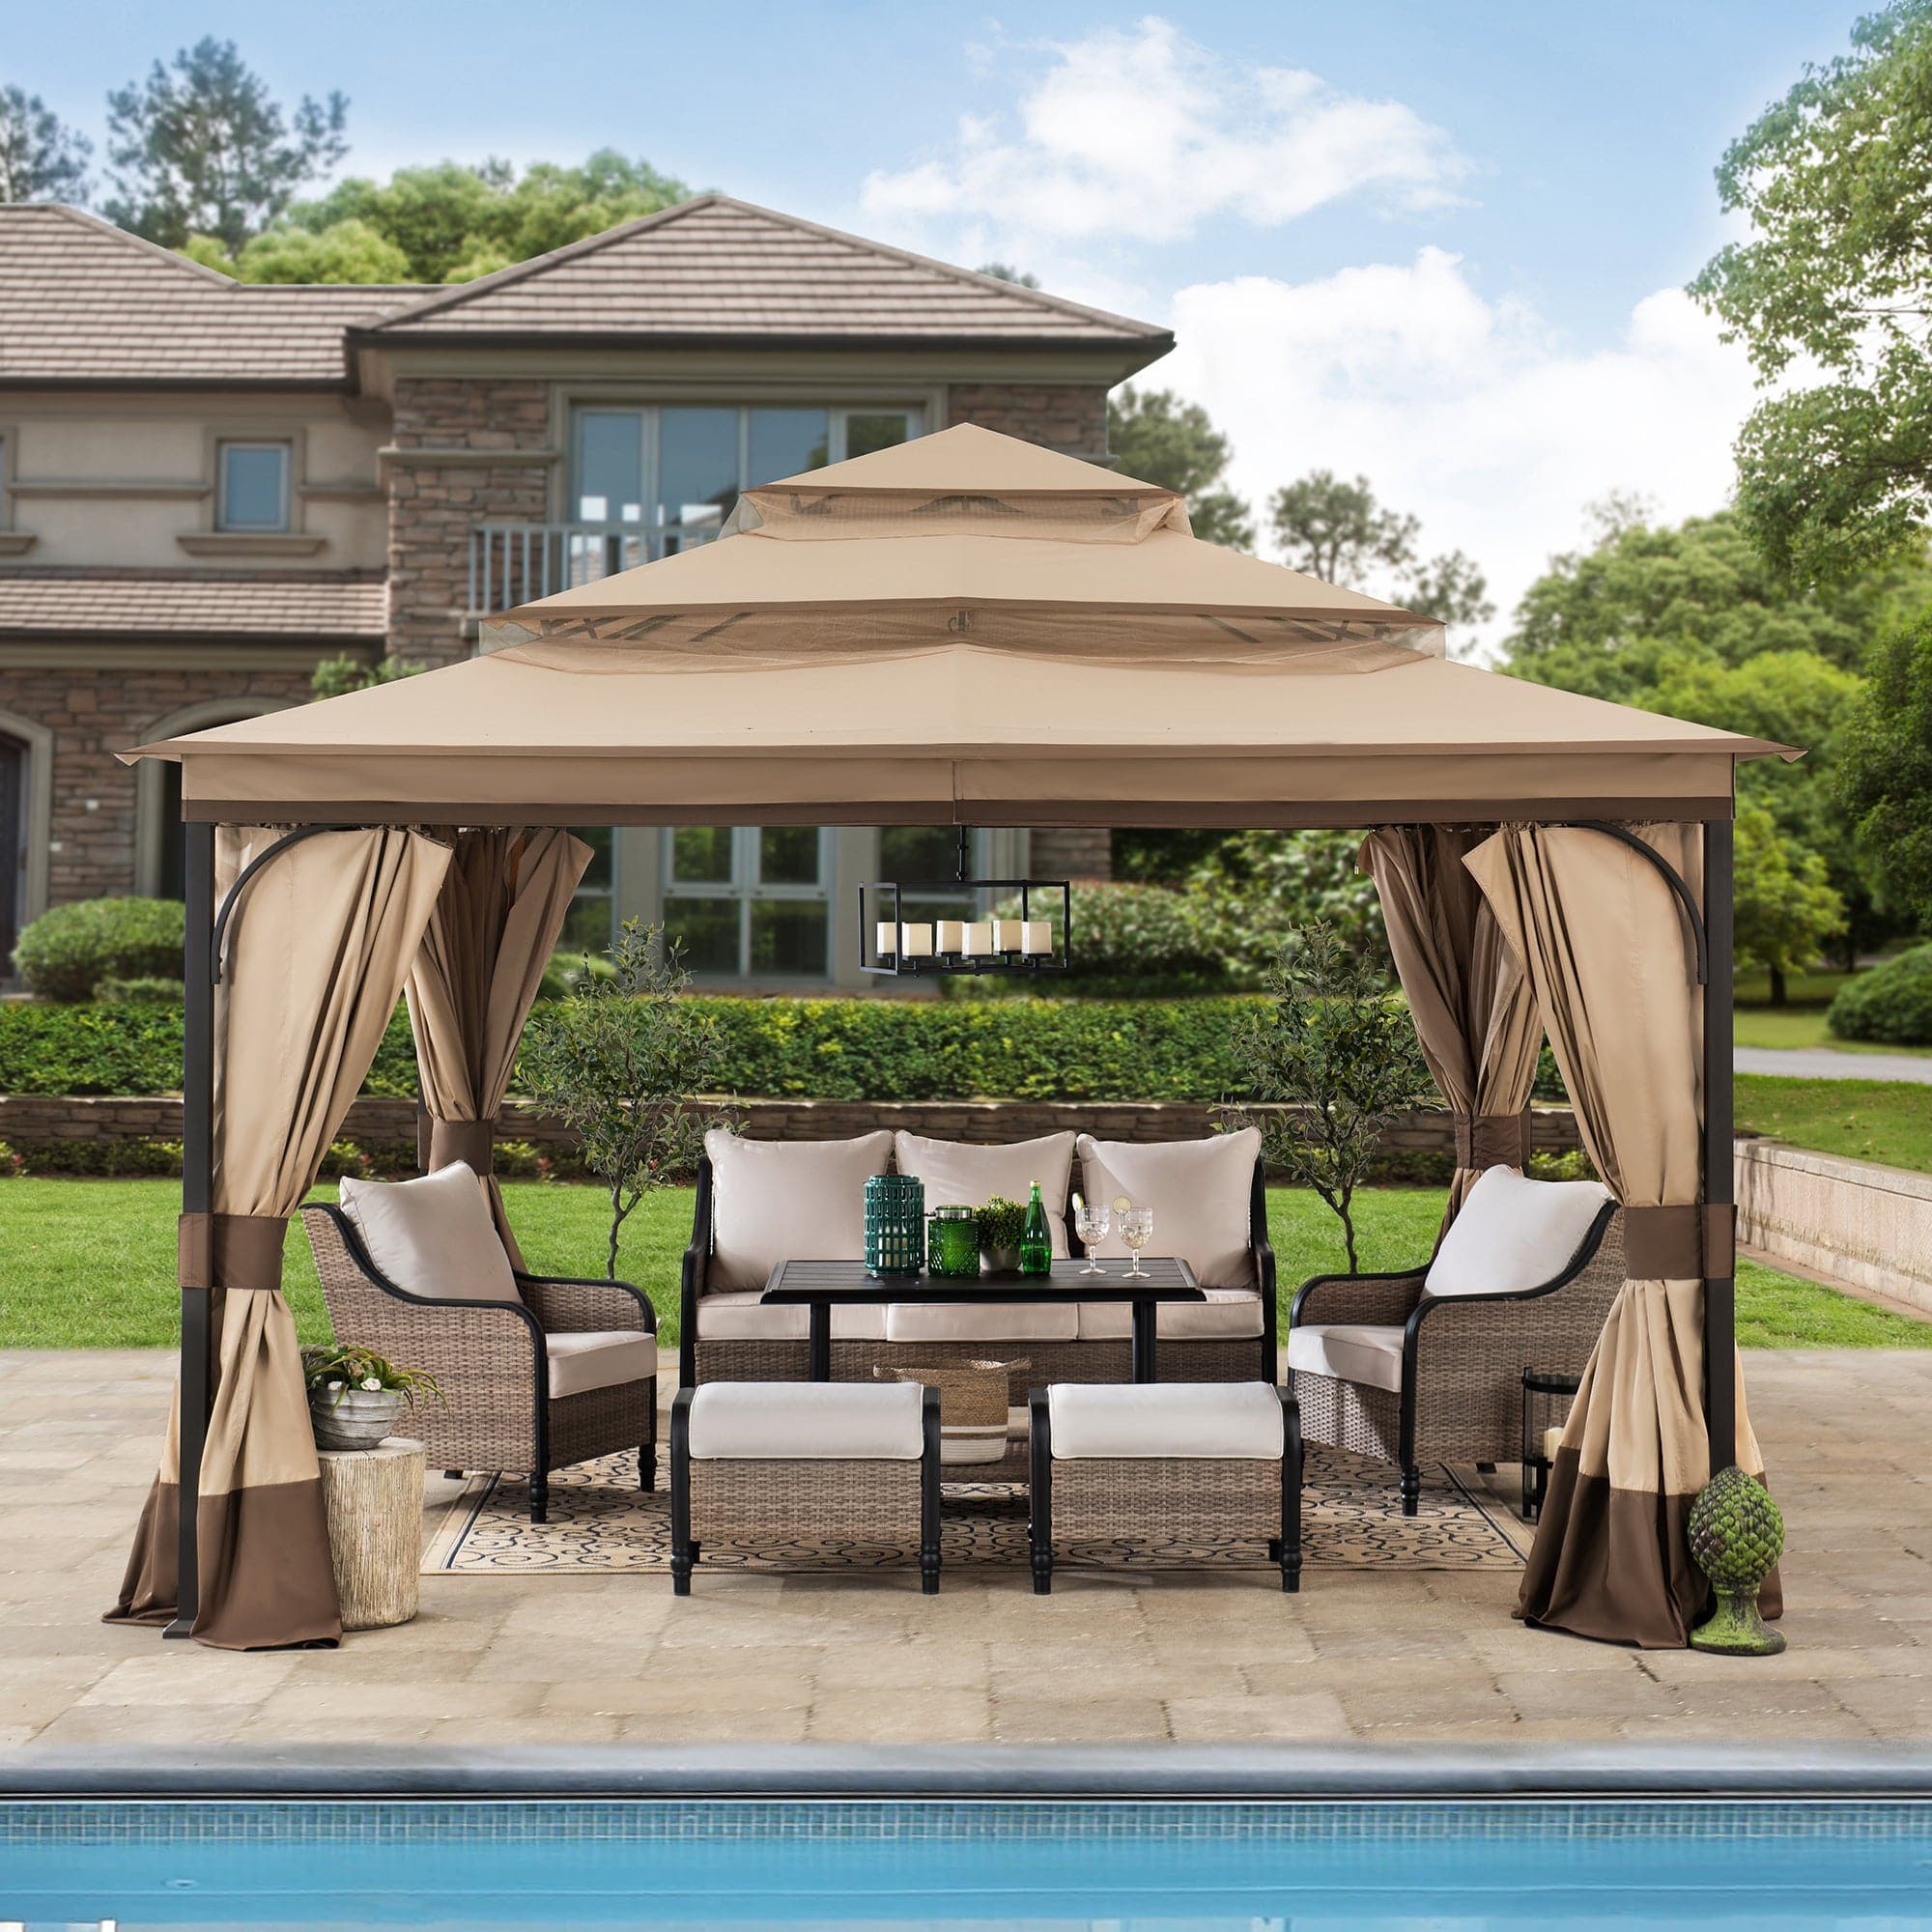 Sunjoy Outdoor Patio 13x13 Tan 3-Tier Steel Backyard Soft Top Gazebo with Netting and Curtains